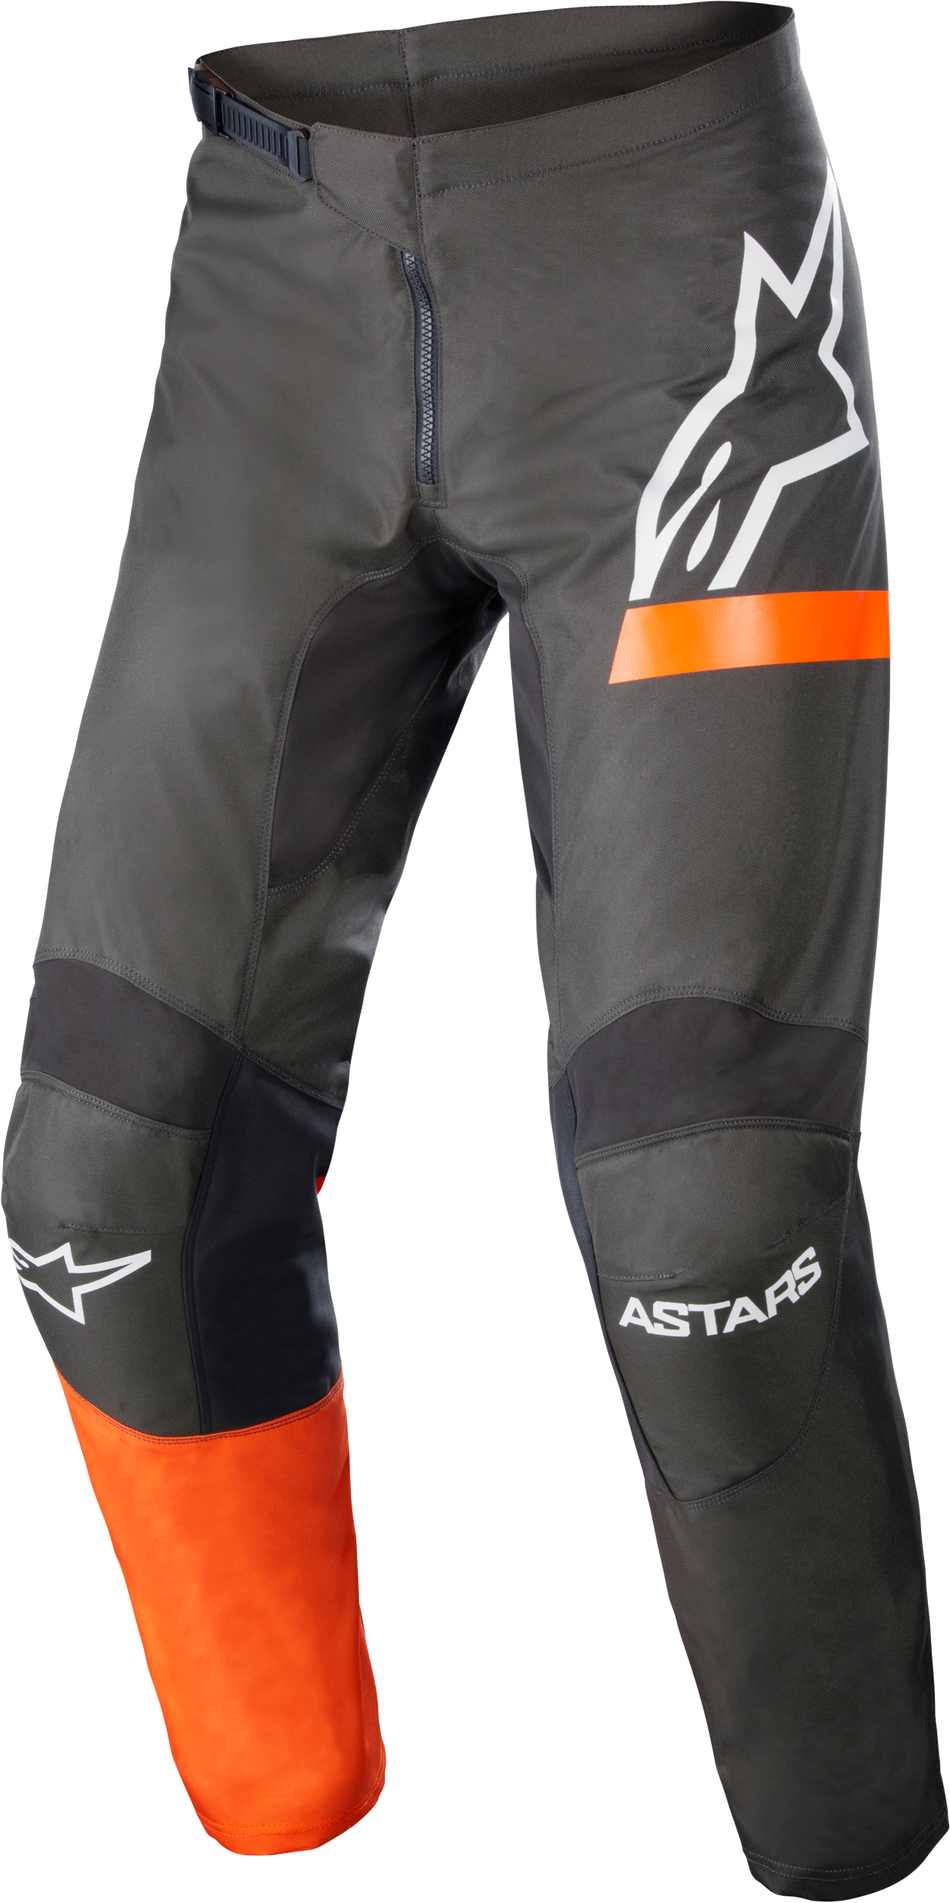 ALPINESTARS Fluid Chaser Pants Anthracite/Coral Fluo Sz 36 3722422-1794-36